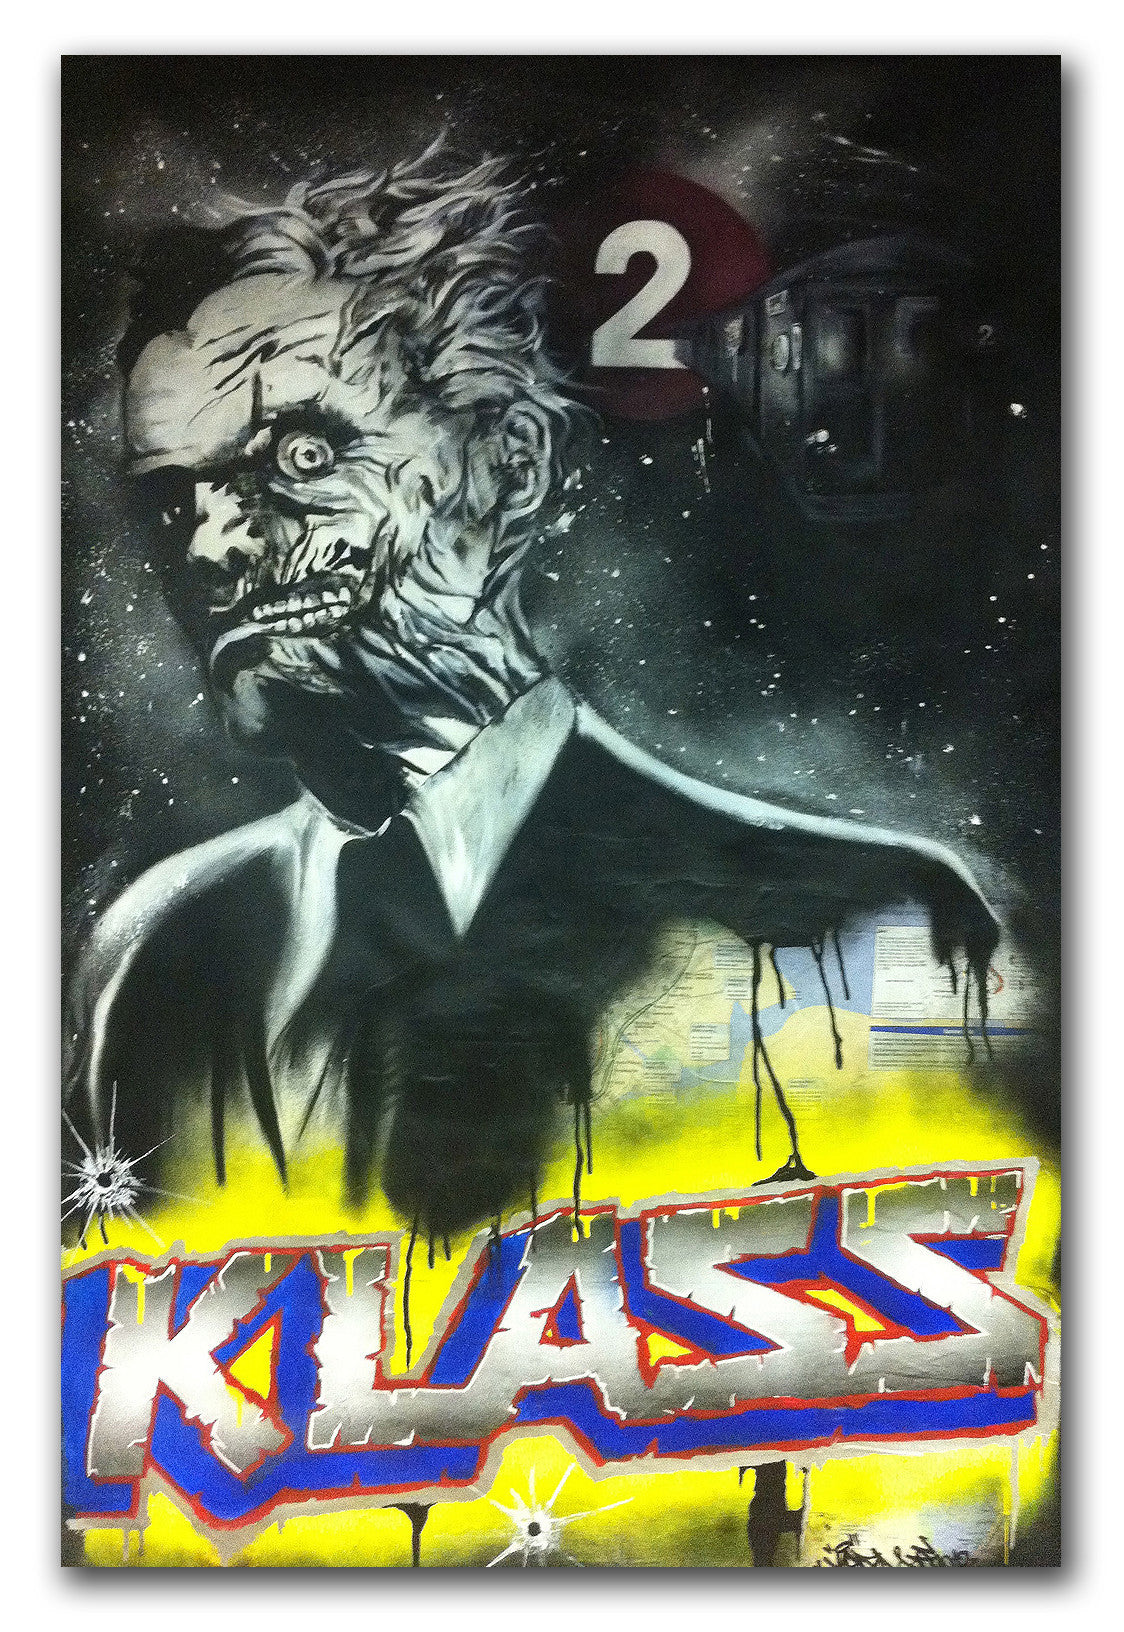 KLASS RTW  -  "Two Face"  Painting